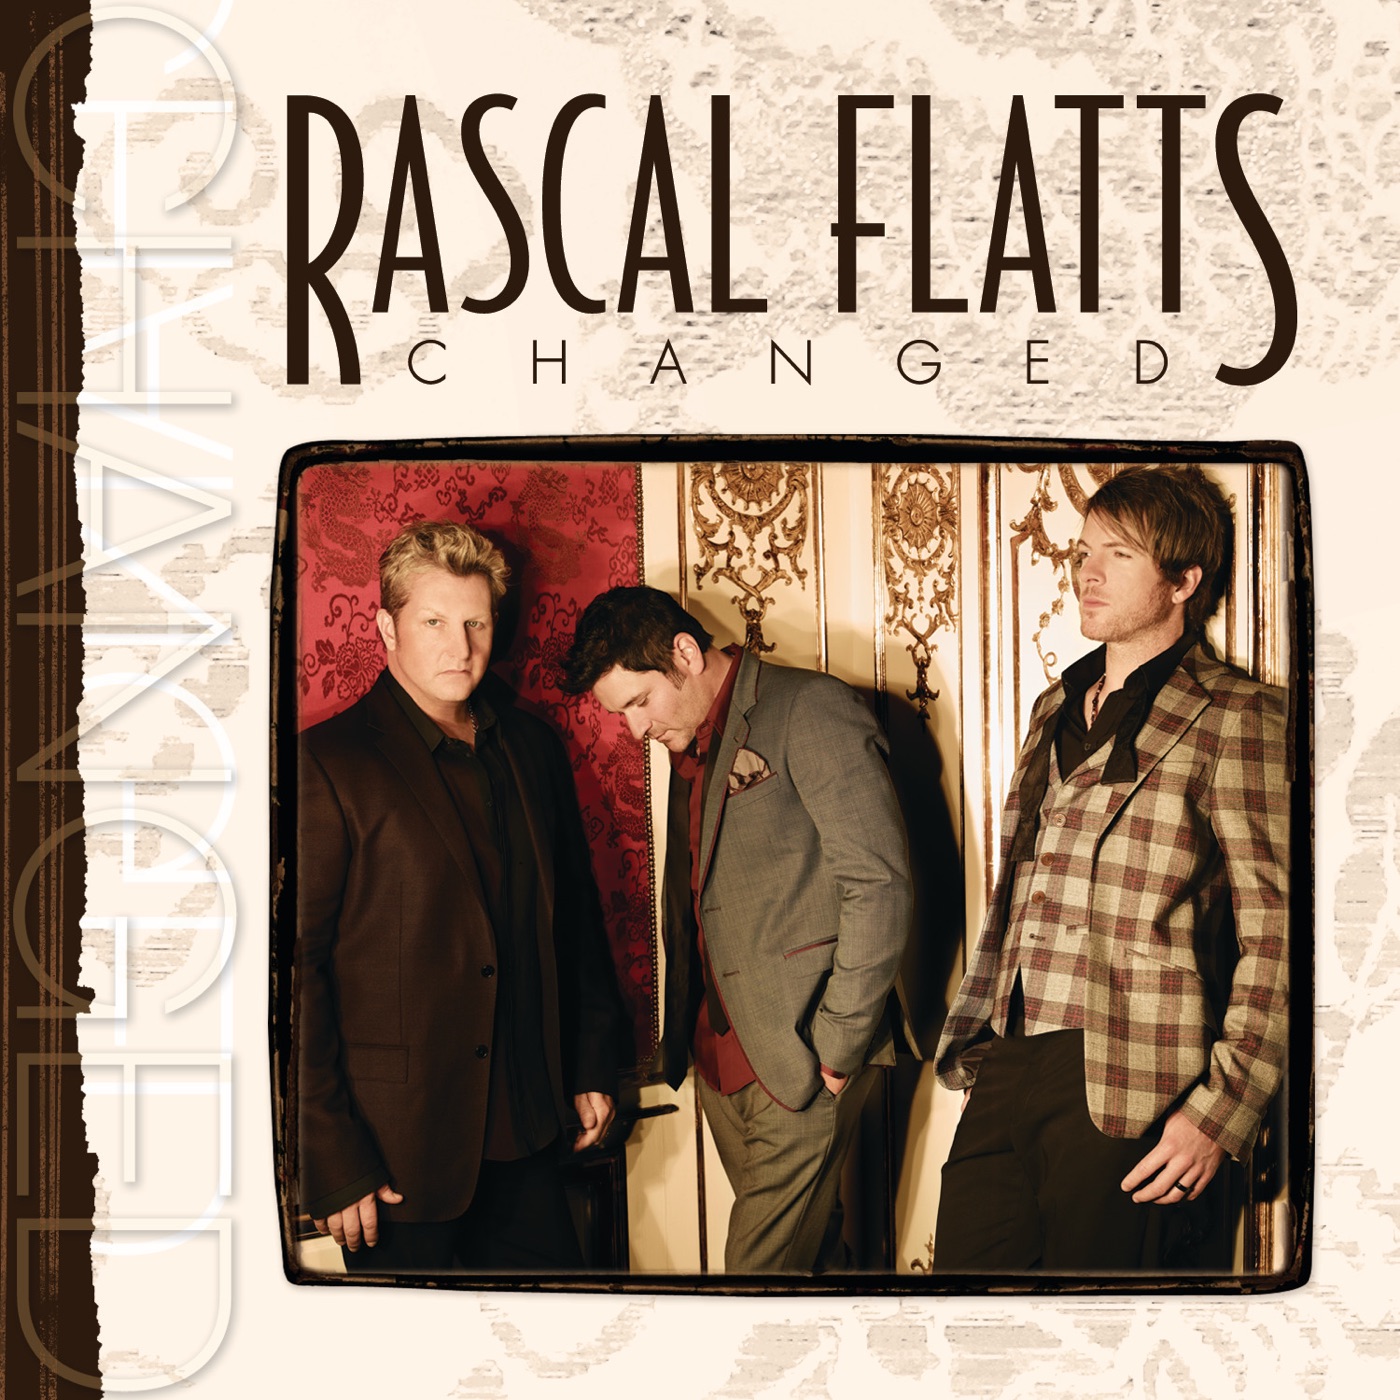 Art for Come Wake Me Up by Rascal Flatts